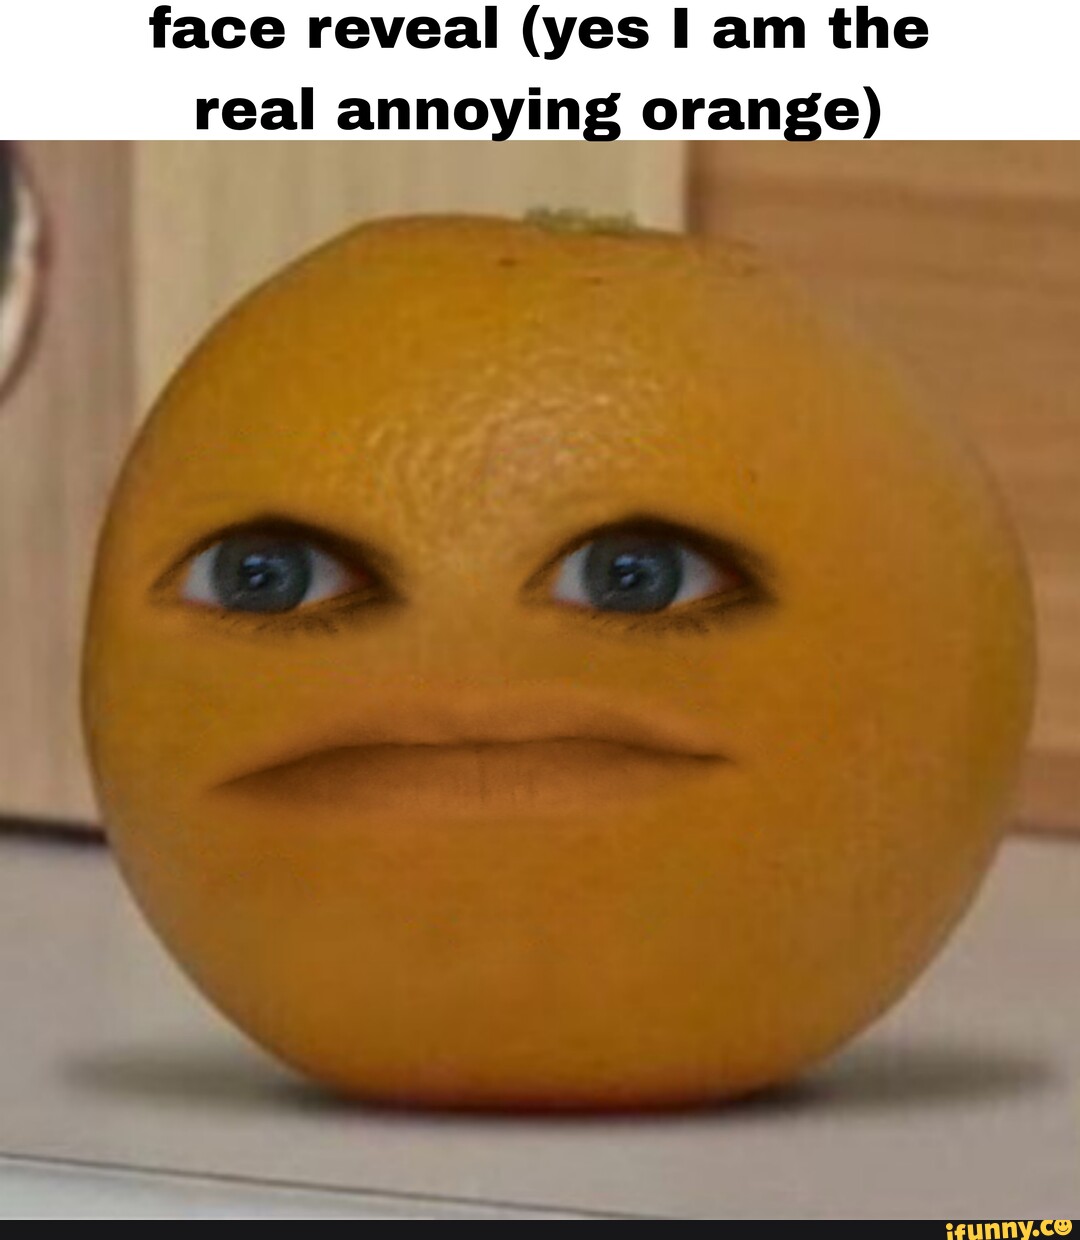 Face reveal (yes I am the real annoying orange - iFunny